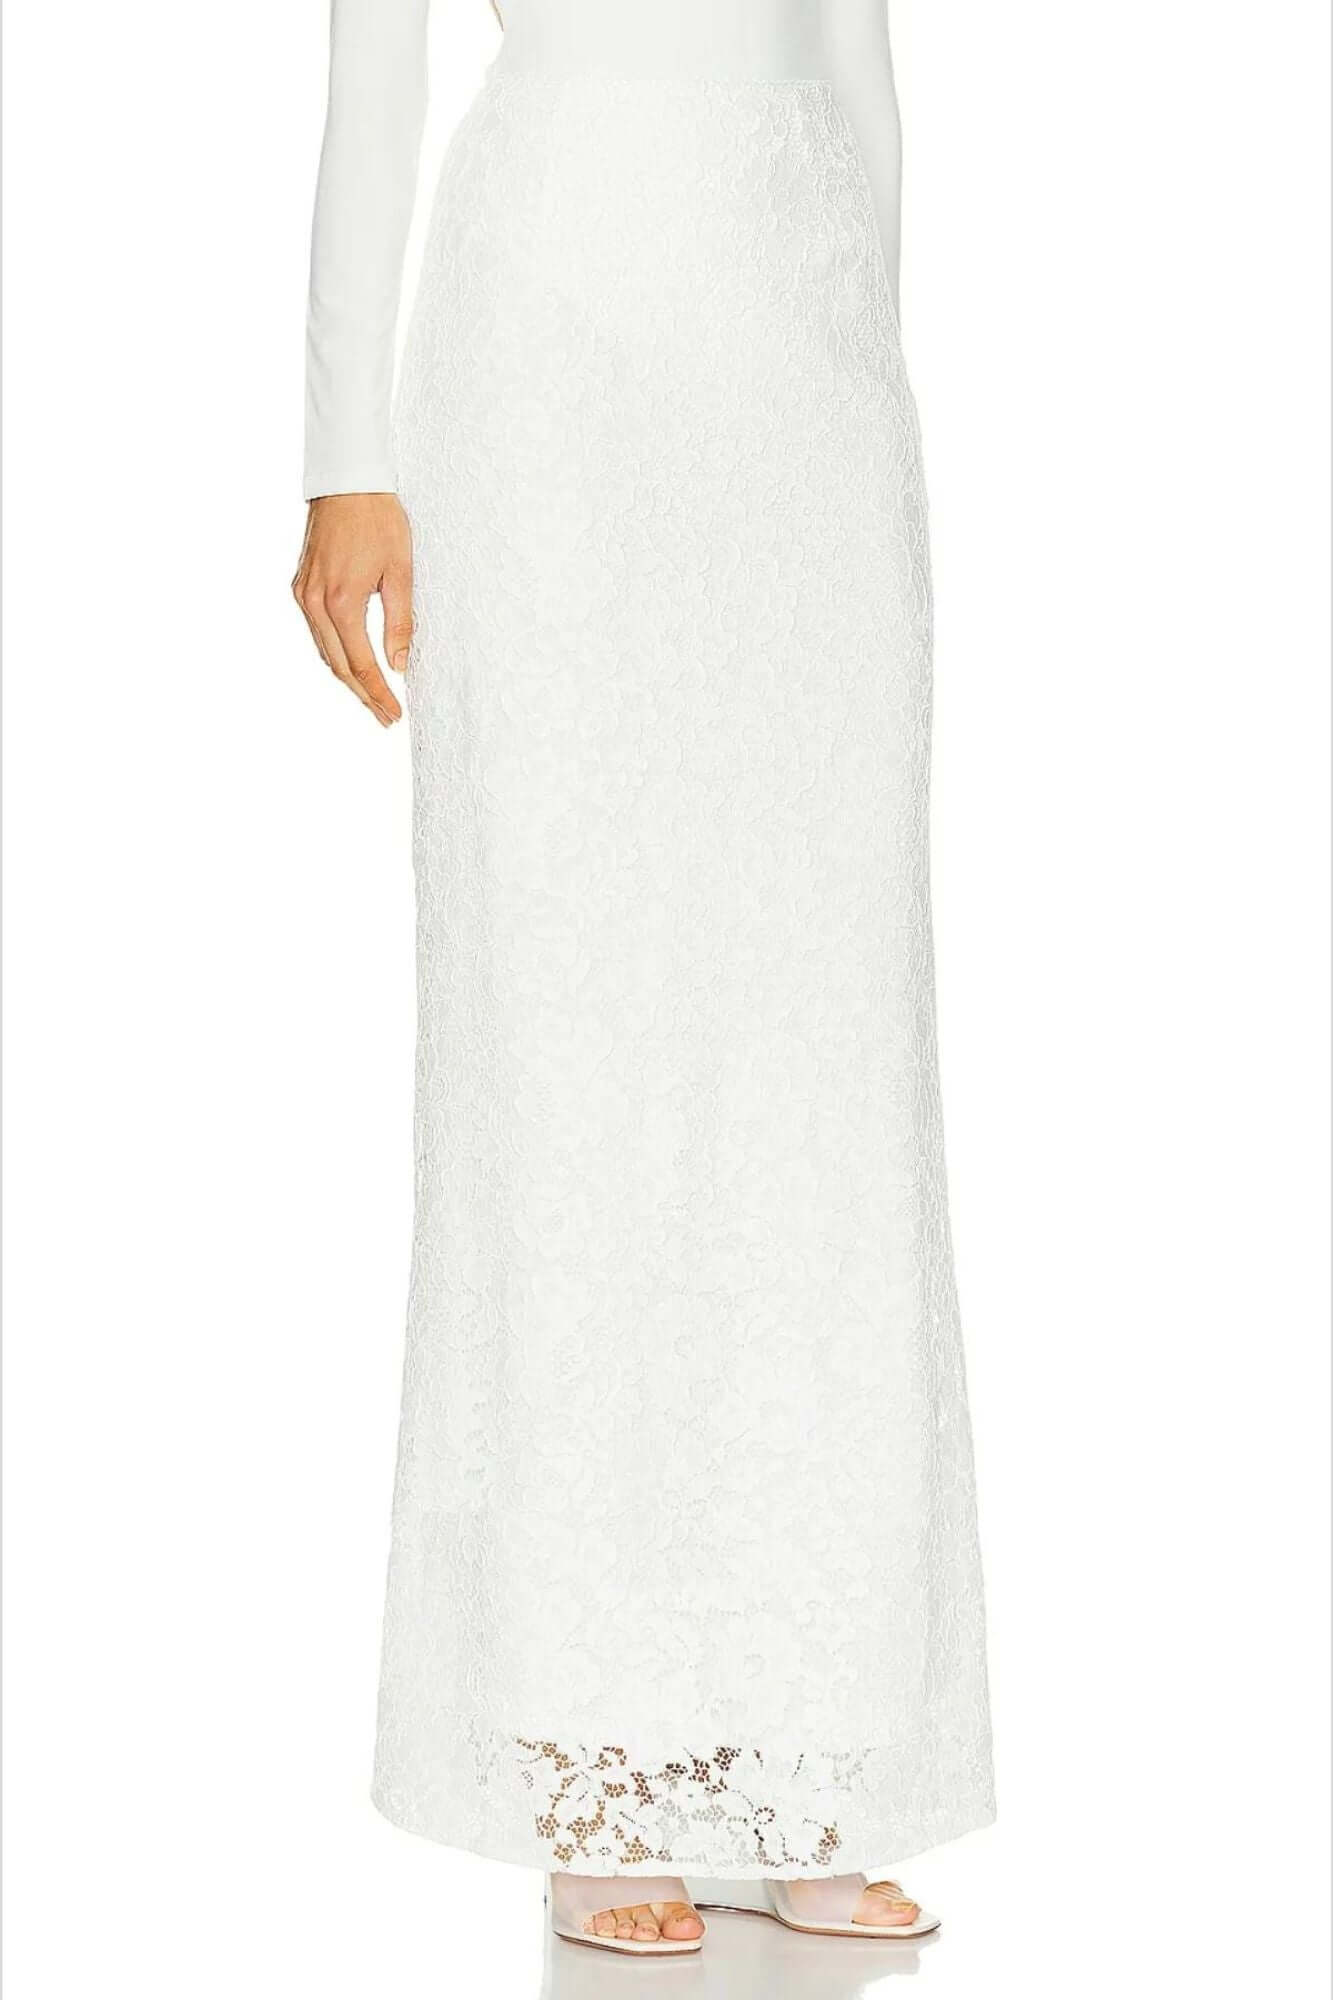 Sans Faff Florence Maxi Skirt in White